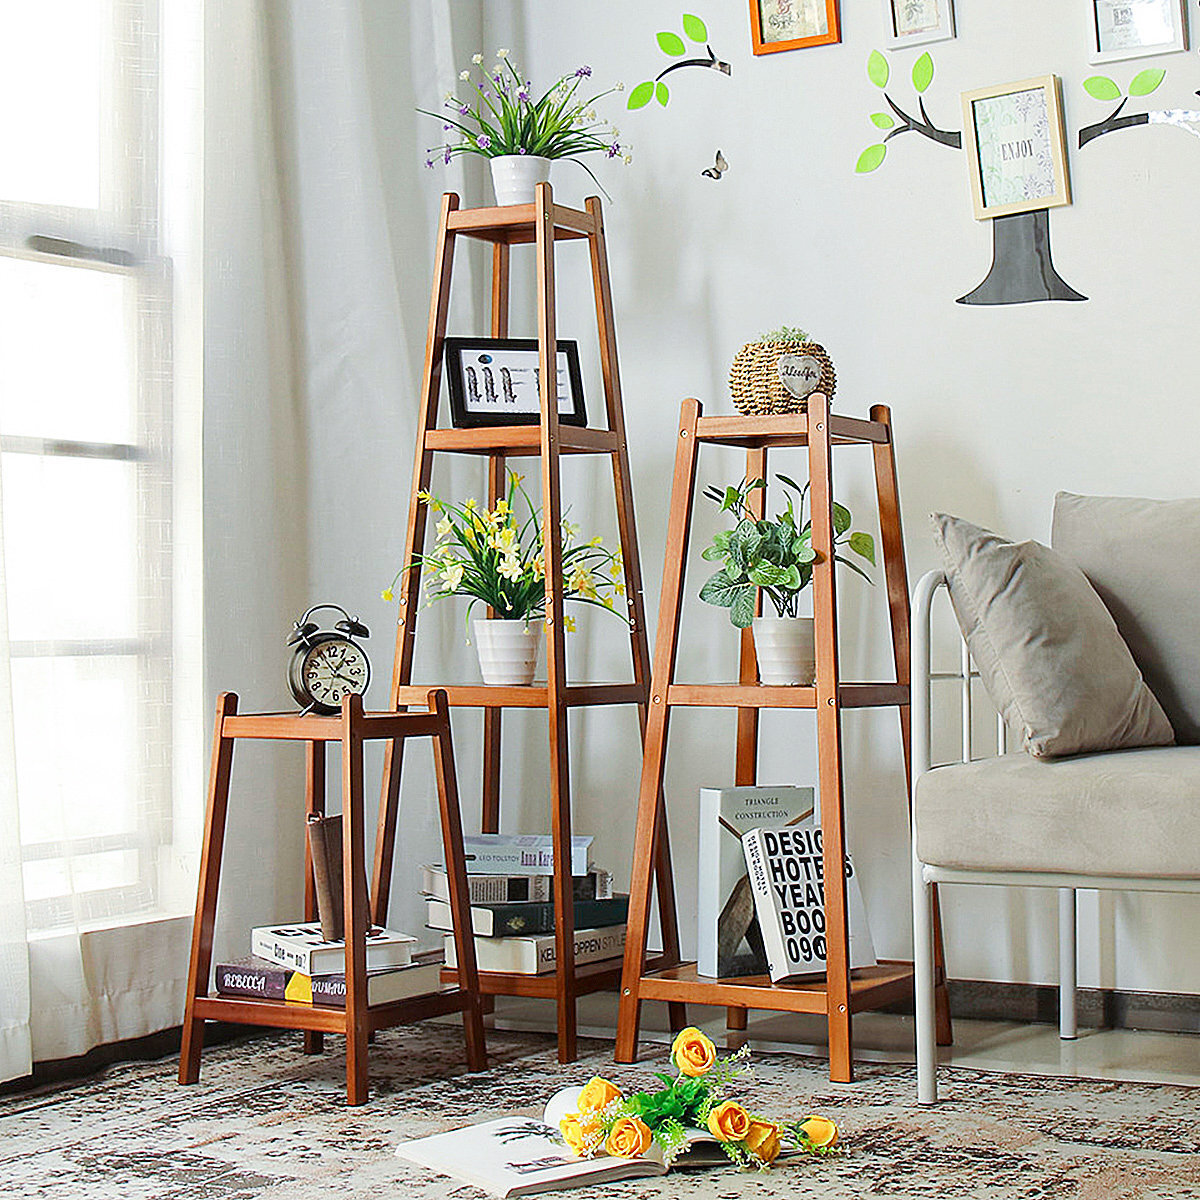 Old fashioned wooden plant stands